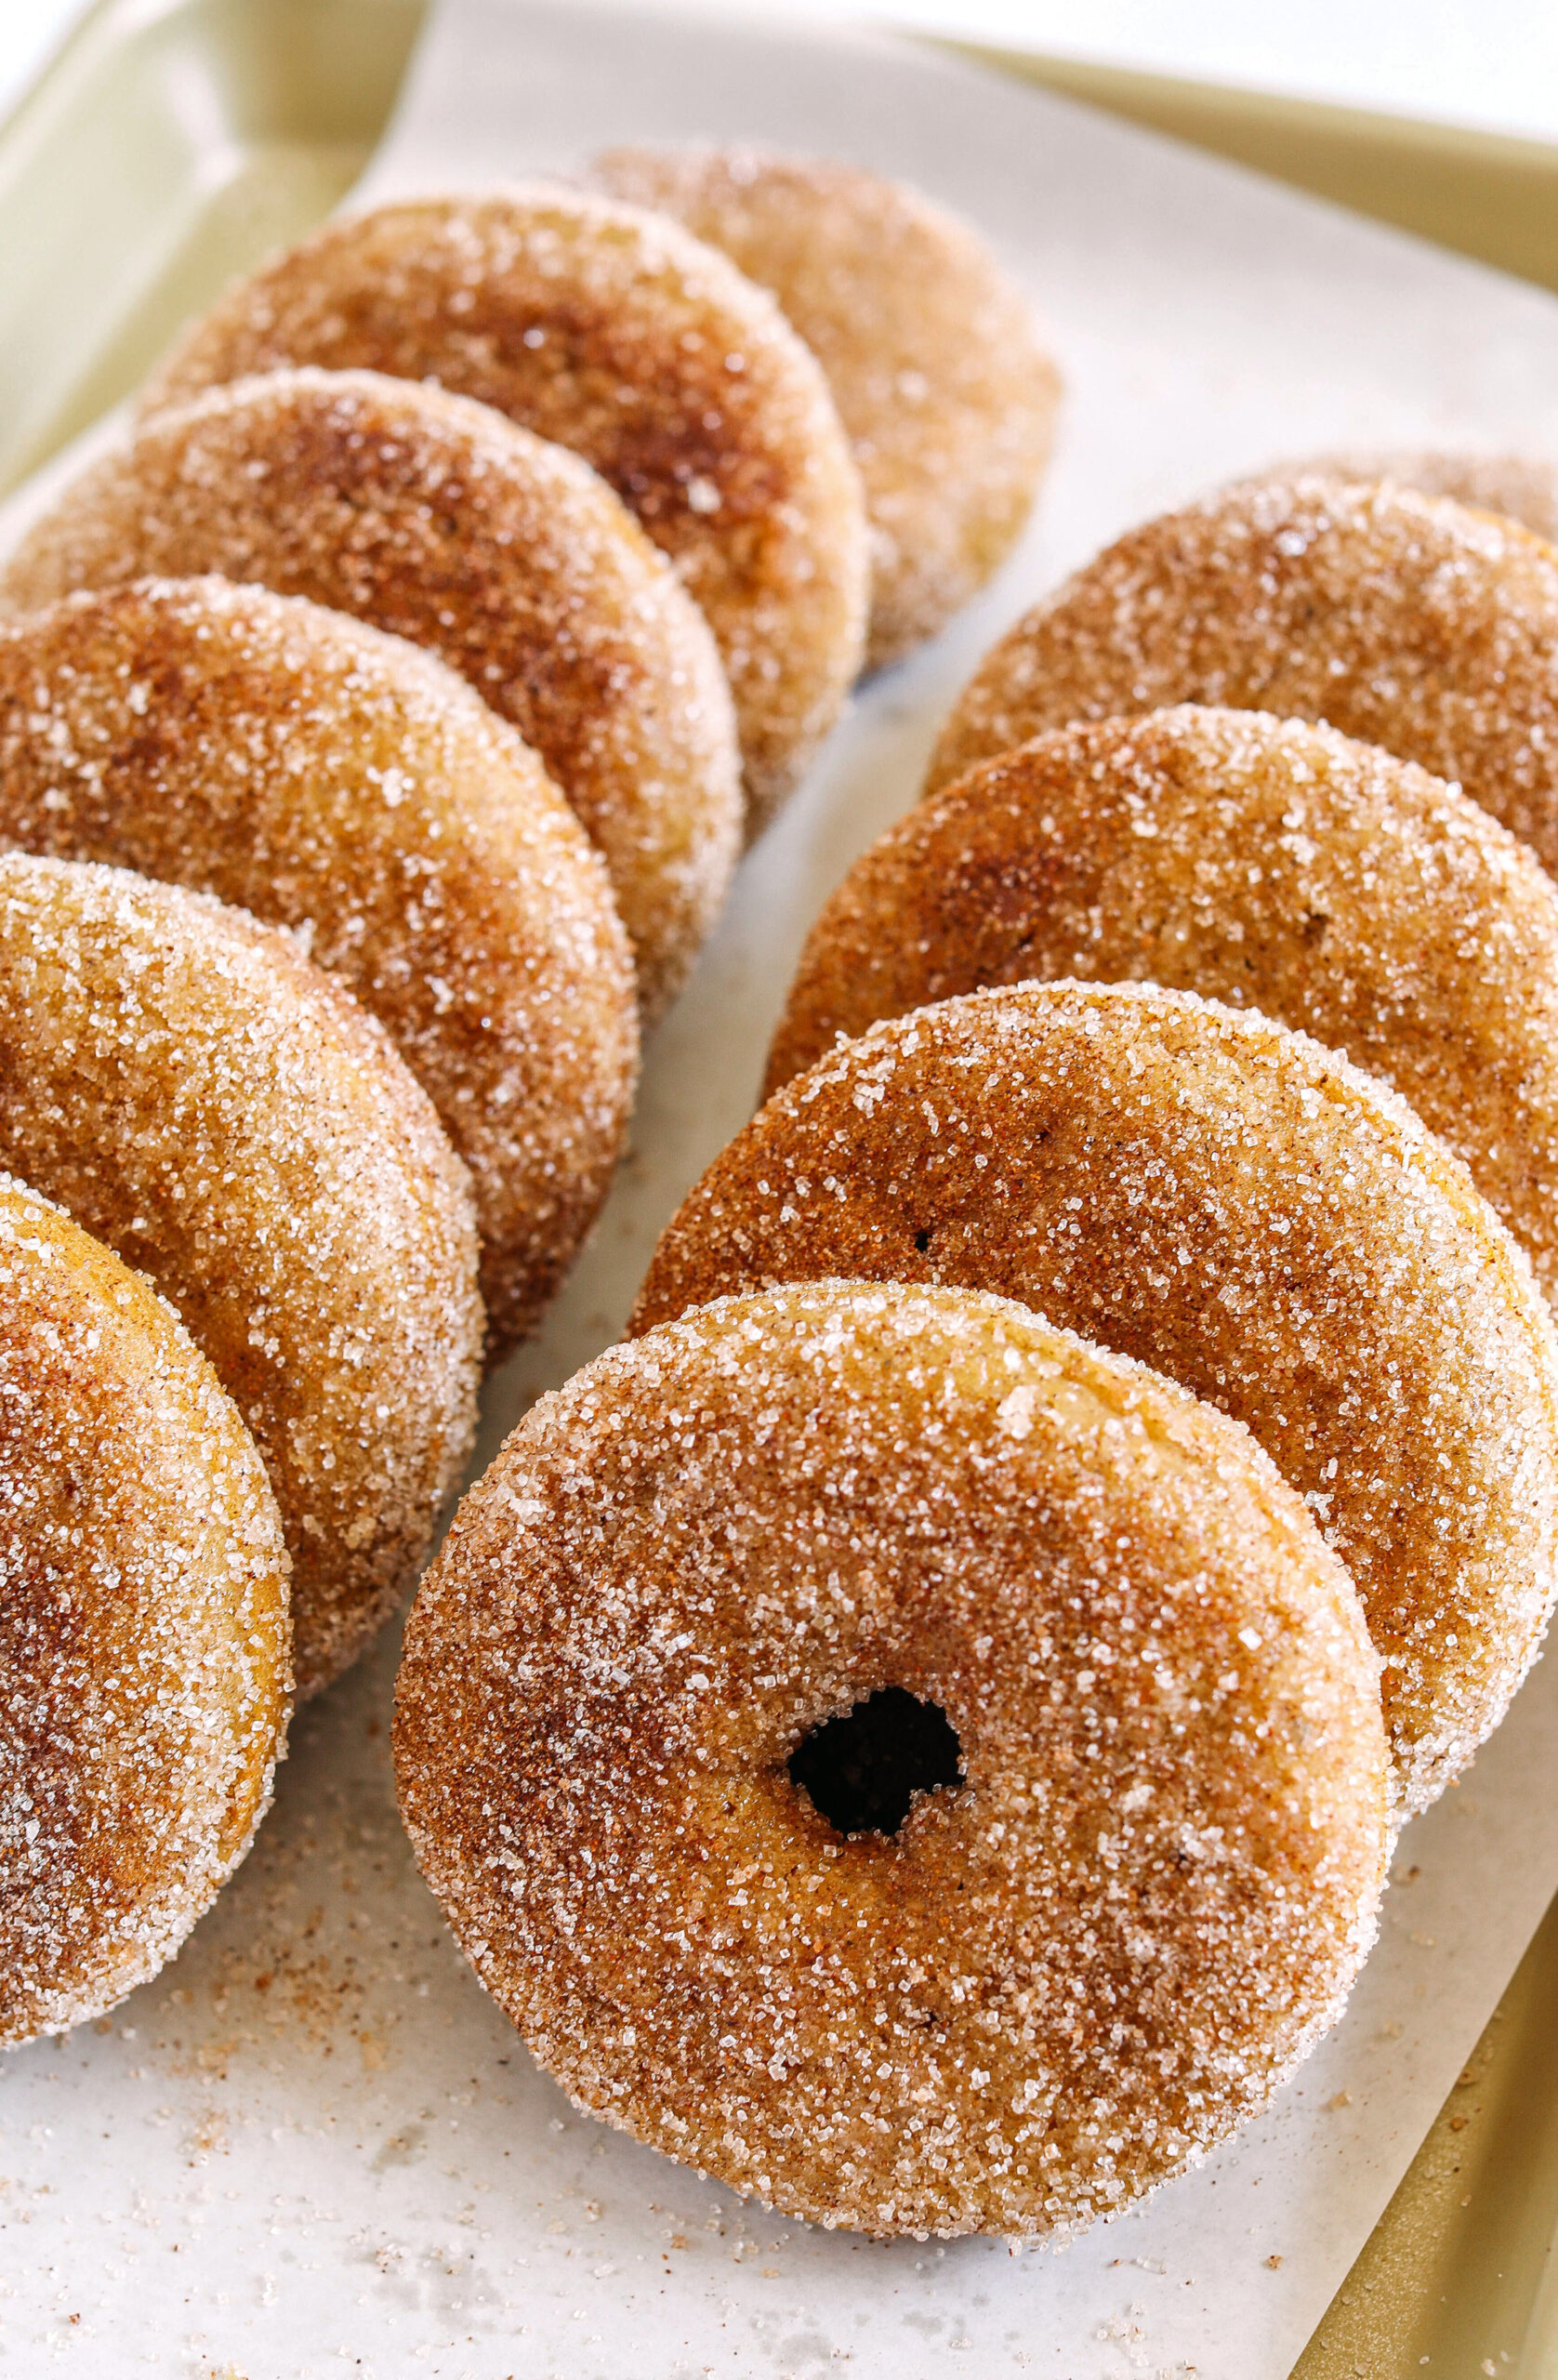 Soft Baked Apple Cider Donuts made healthier with whole wheat flour, applesauce and Greek yogurt for the perfect fall treat that comes together in just 20 minutes!  Loaded with warm spices and coated with cinnamon and sugar!